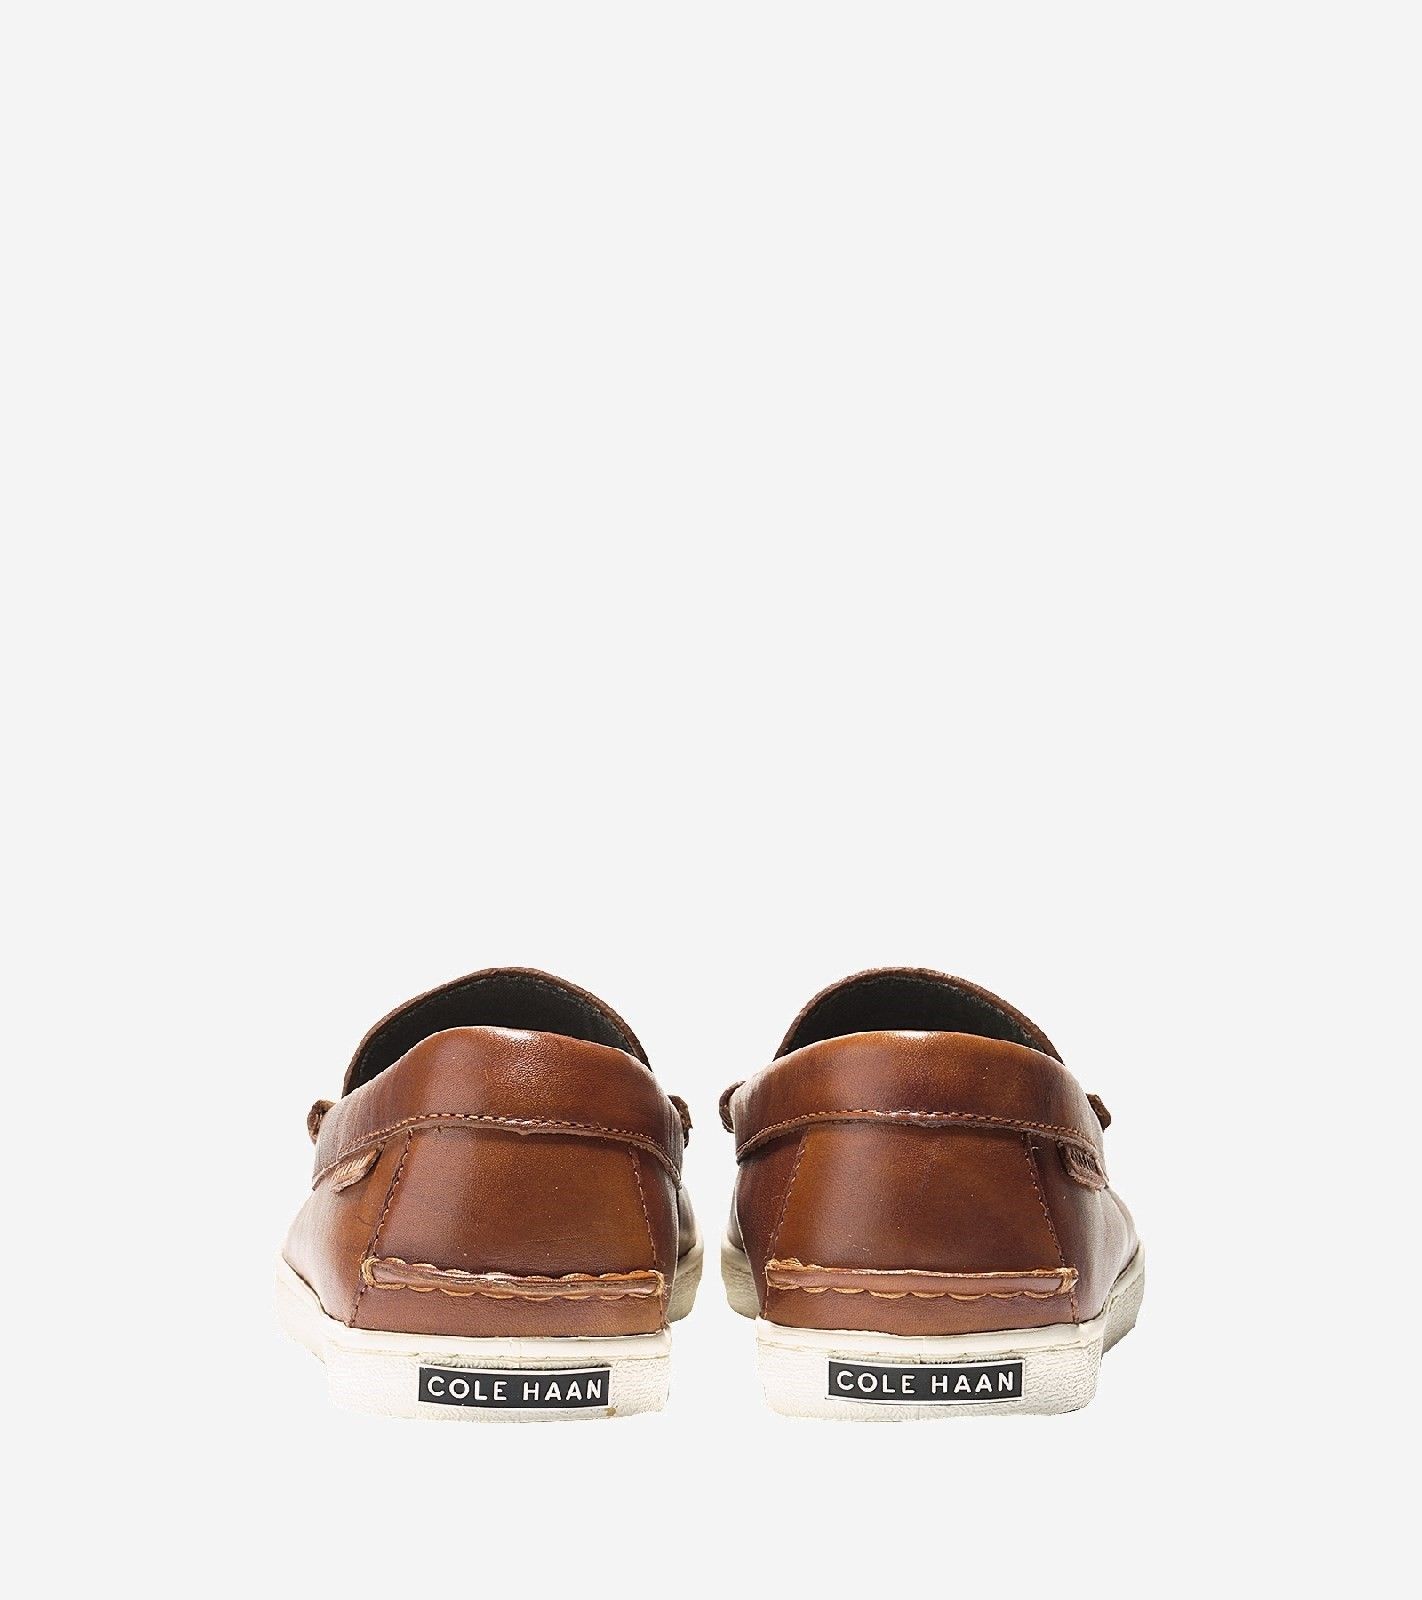 The Pinch Weekender Loafer is a modern take on the iconic penny loafer silhouette,a staple of ours for decades.Refering to the manner in which a cobbler 'pinches' the leather as it's sewn together. Our Grand.OS innovation delivers superior cushioning Grand.OS innovation. 
Pinched Sewn Leather. 
Superior Cushoning.